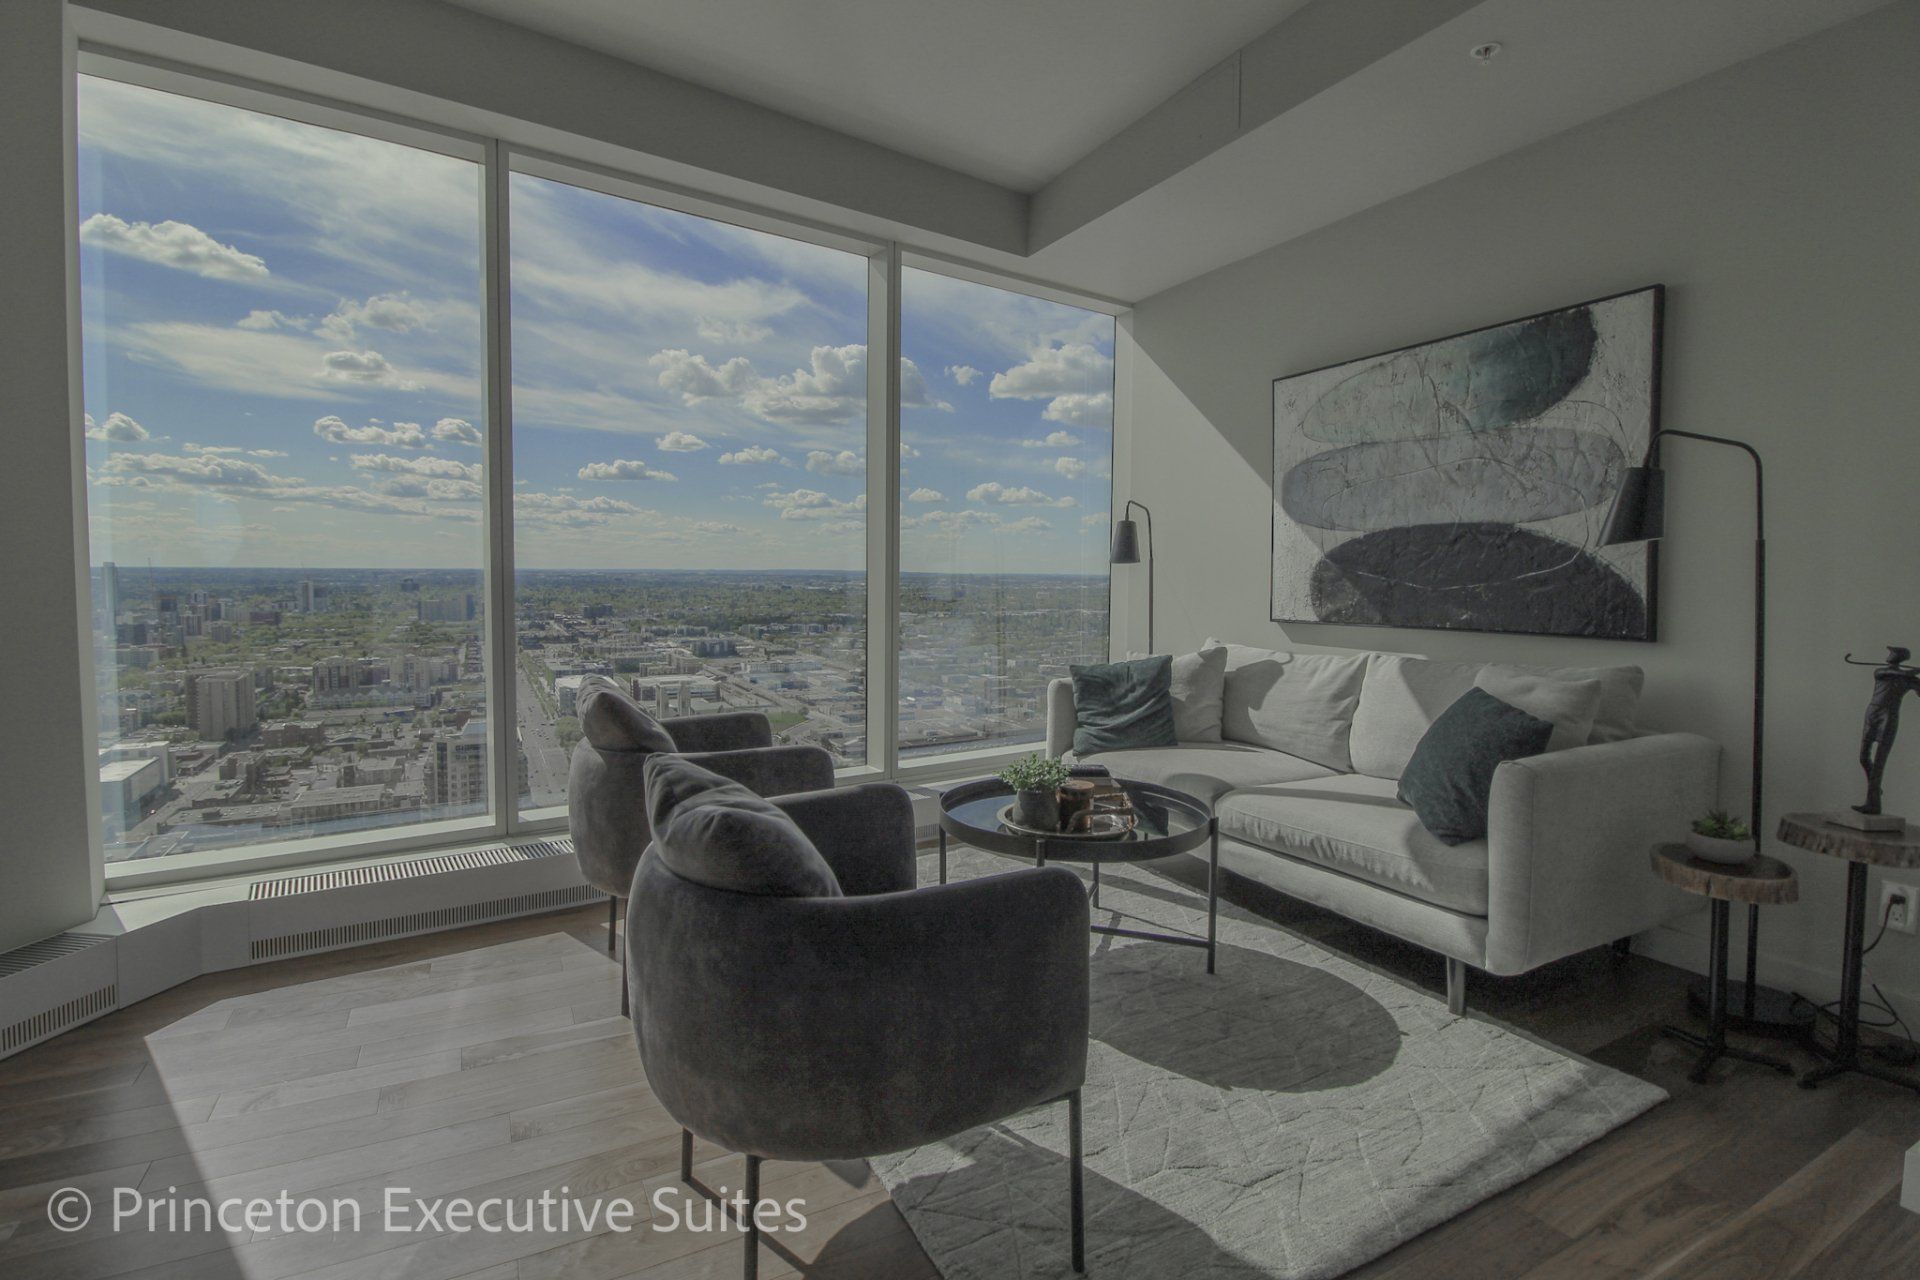 Spectacular view in this stunning furnished apartment in the legends tower downtown edmonton.  Grey furnishings , ceiling to floor windows